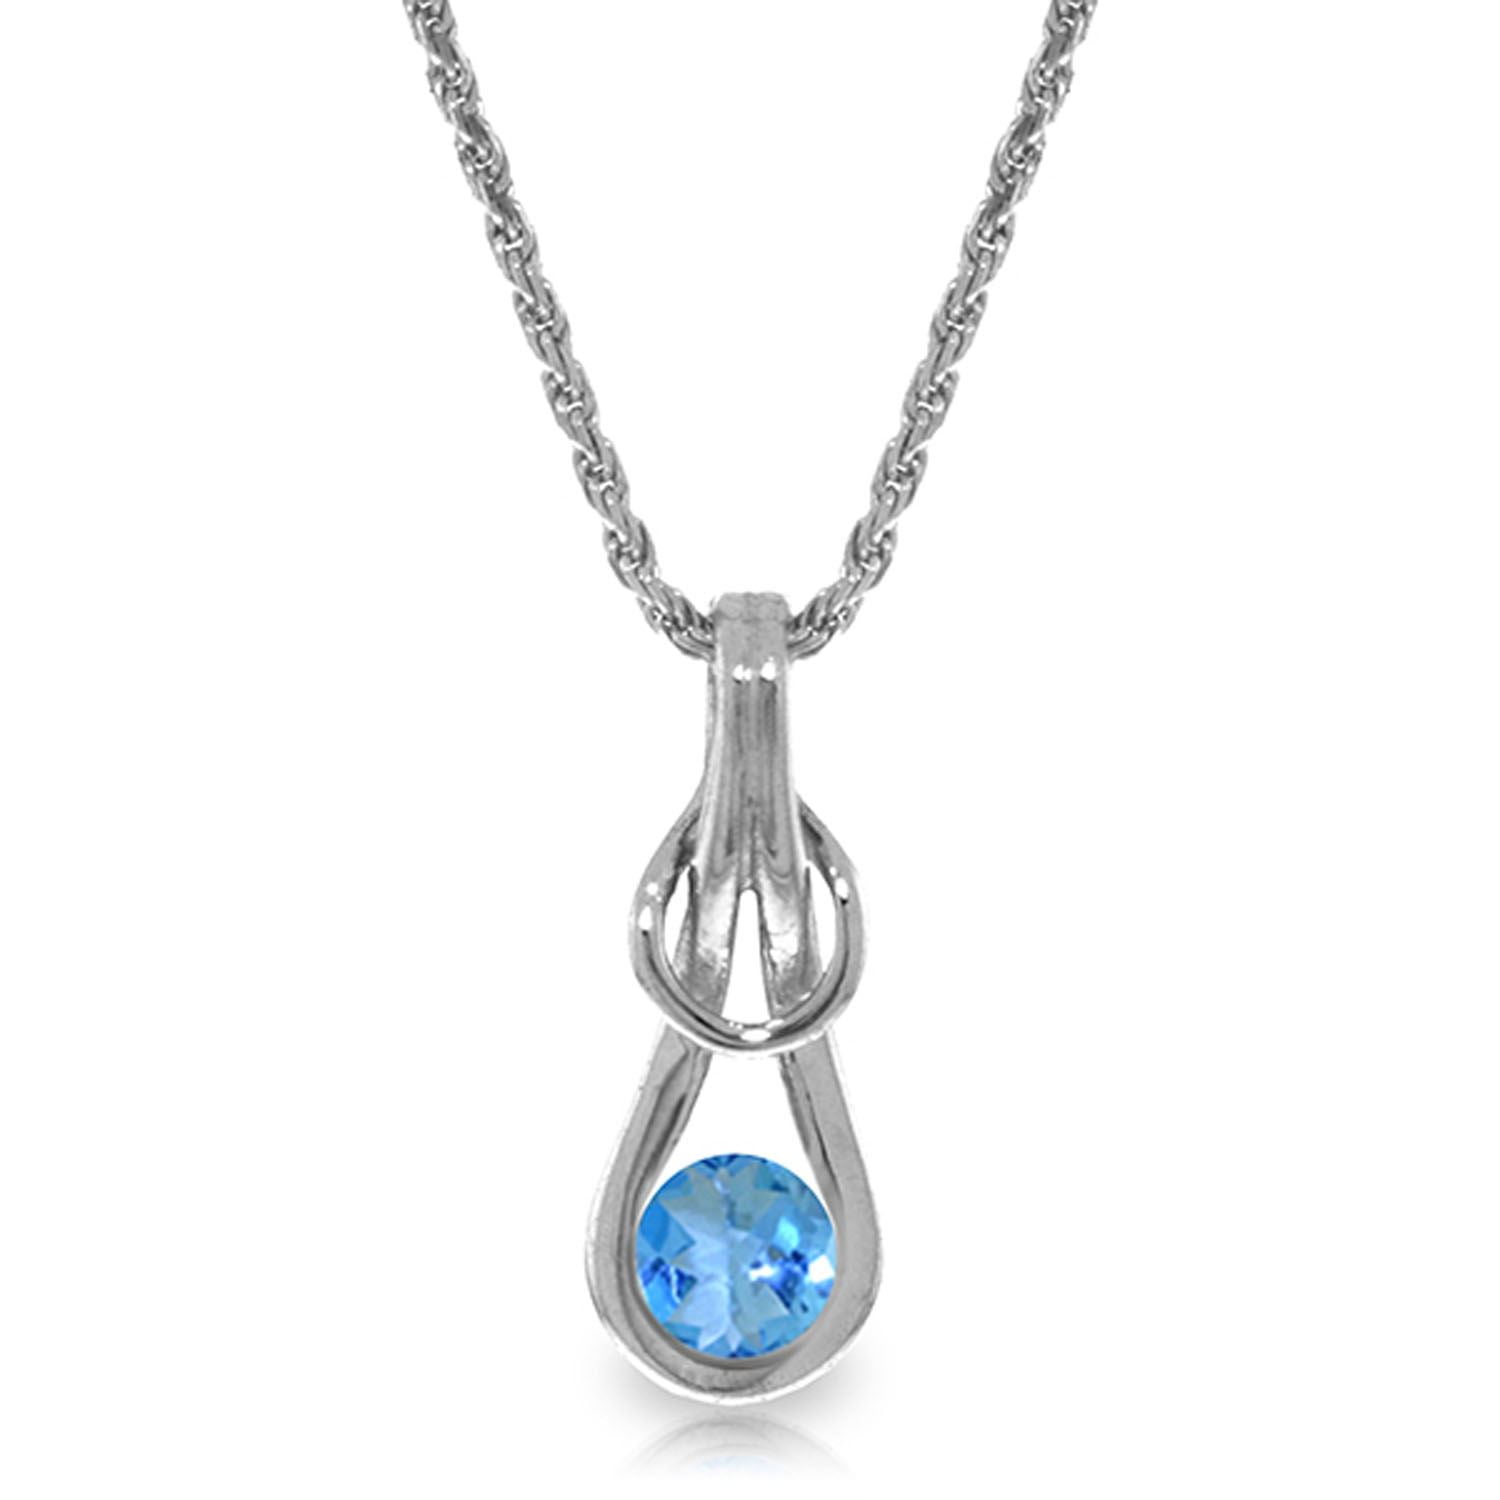 ALARRI 5.5 Carat 14K Solid White Gold Tomorrow We Live Blue Topaz Necklace with 20 Inch Chain Length